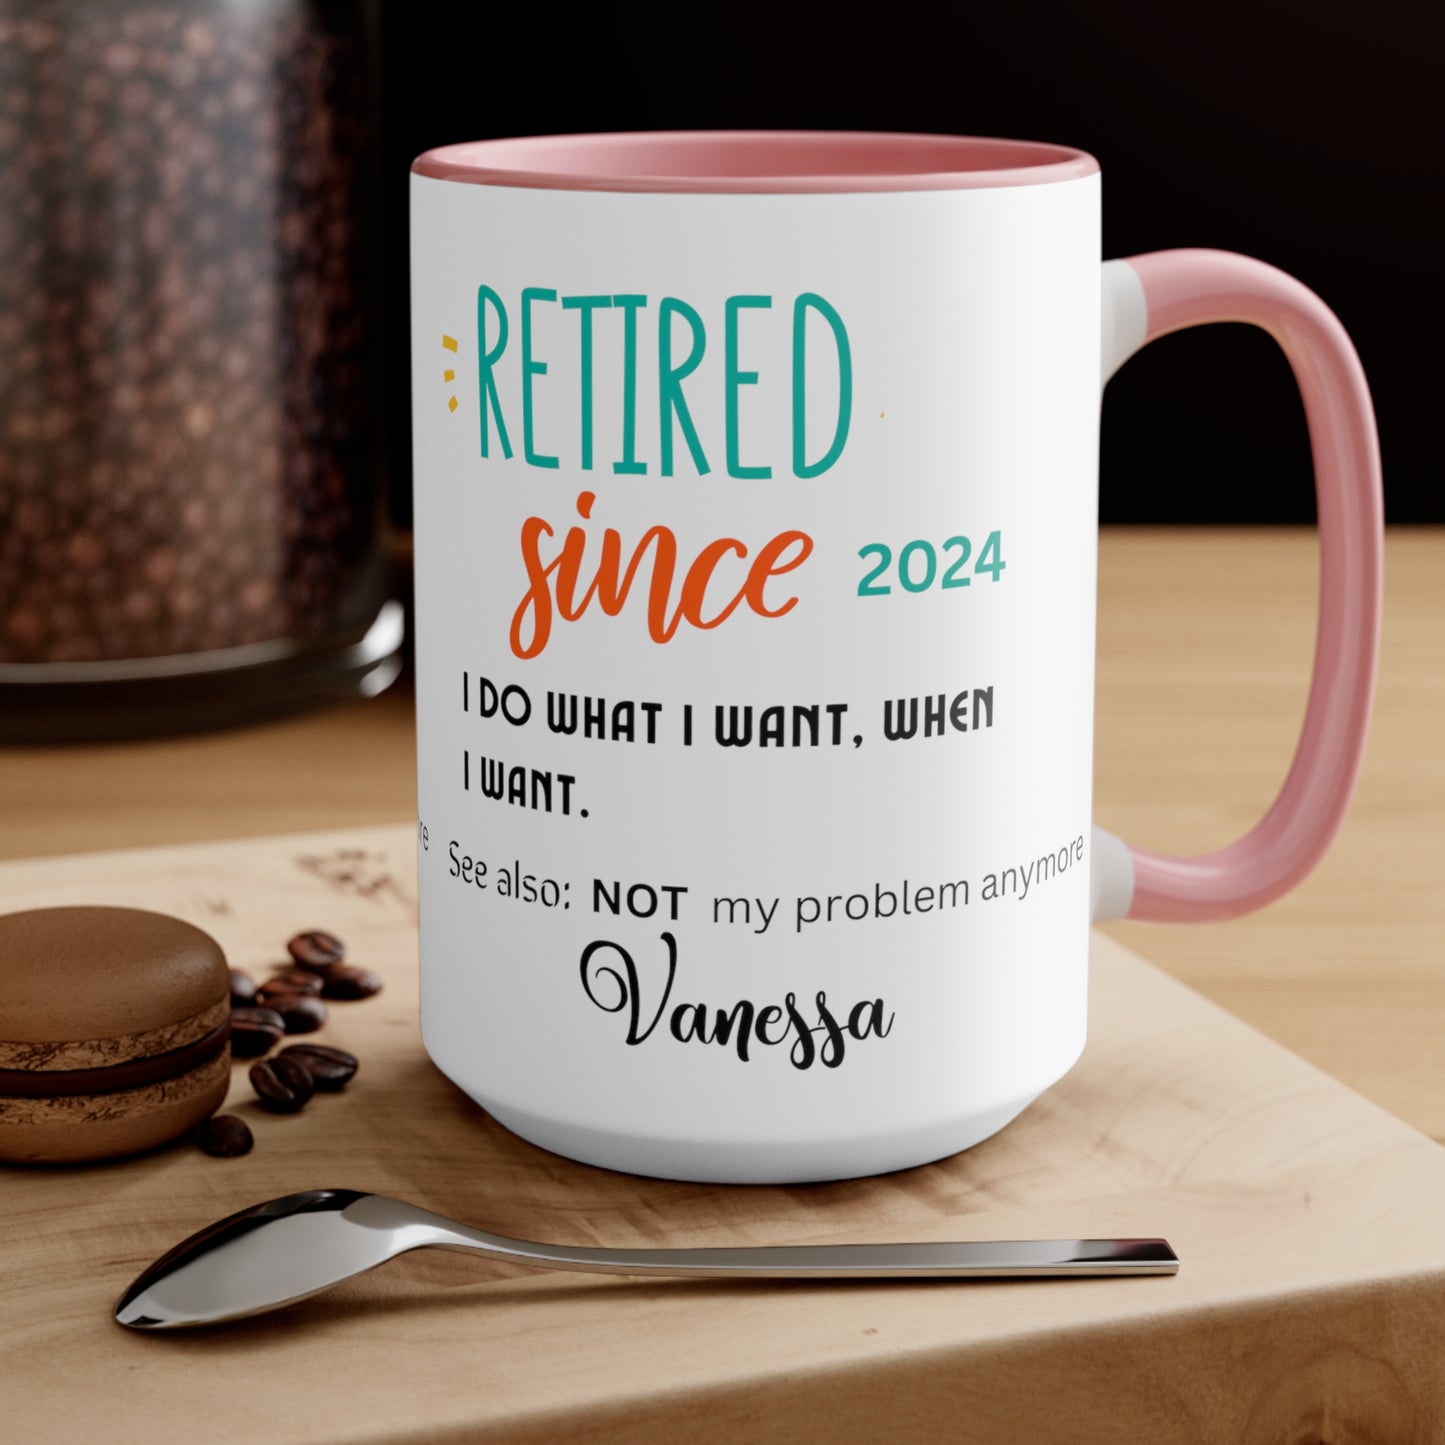 Personalized Retired Coffee Mug, Retirement Coffee Mug Cup, Retirement Mug, Retirement Cup, Retirement Gifts For Women, Gift for Men